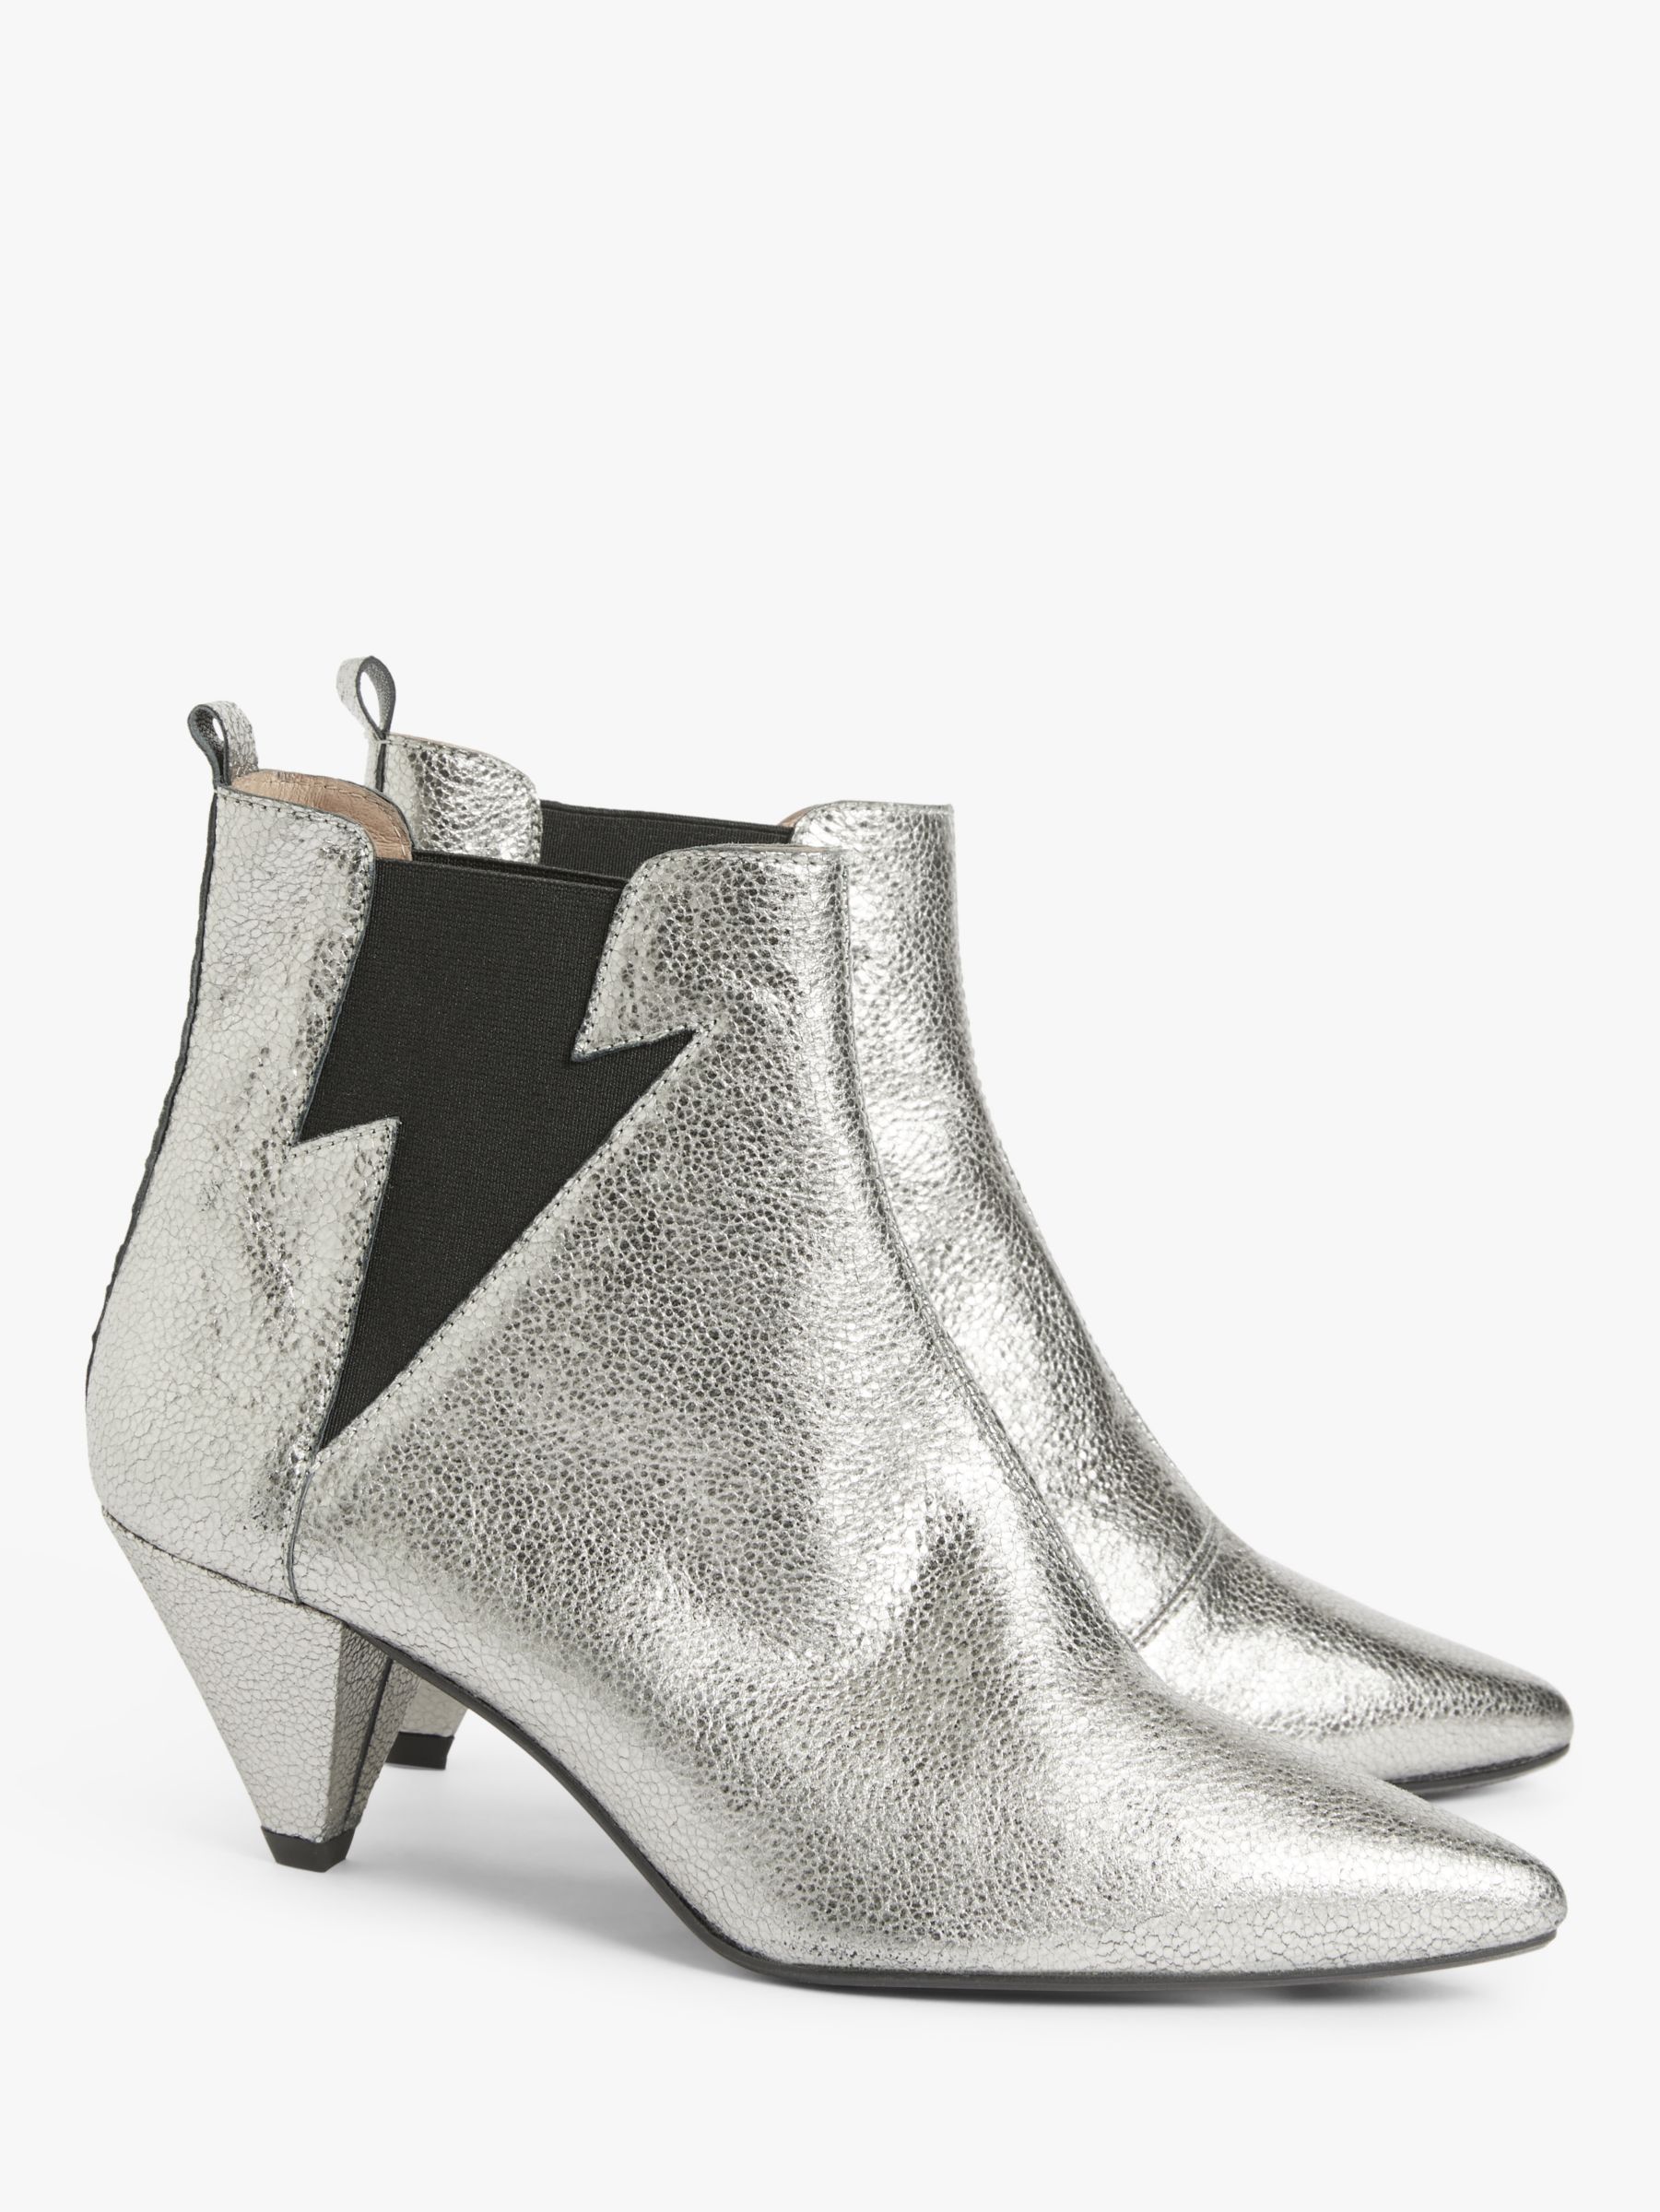 AND/OR Robbin Leather Lightning Bolt Ankle Boots, Silver at John Lewis &  Partners